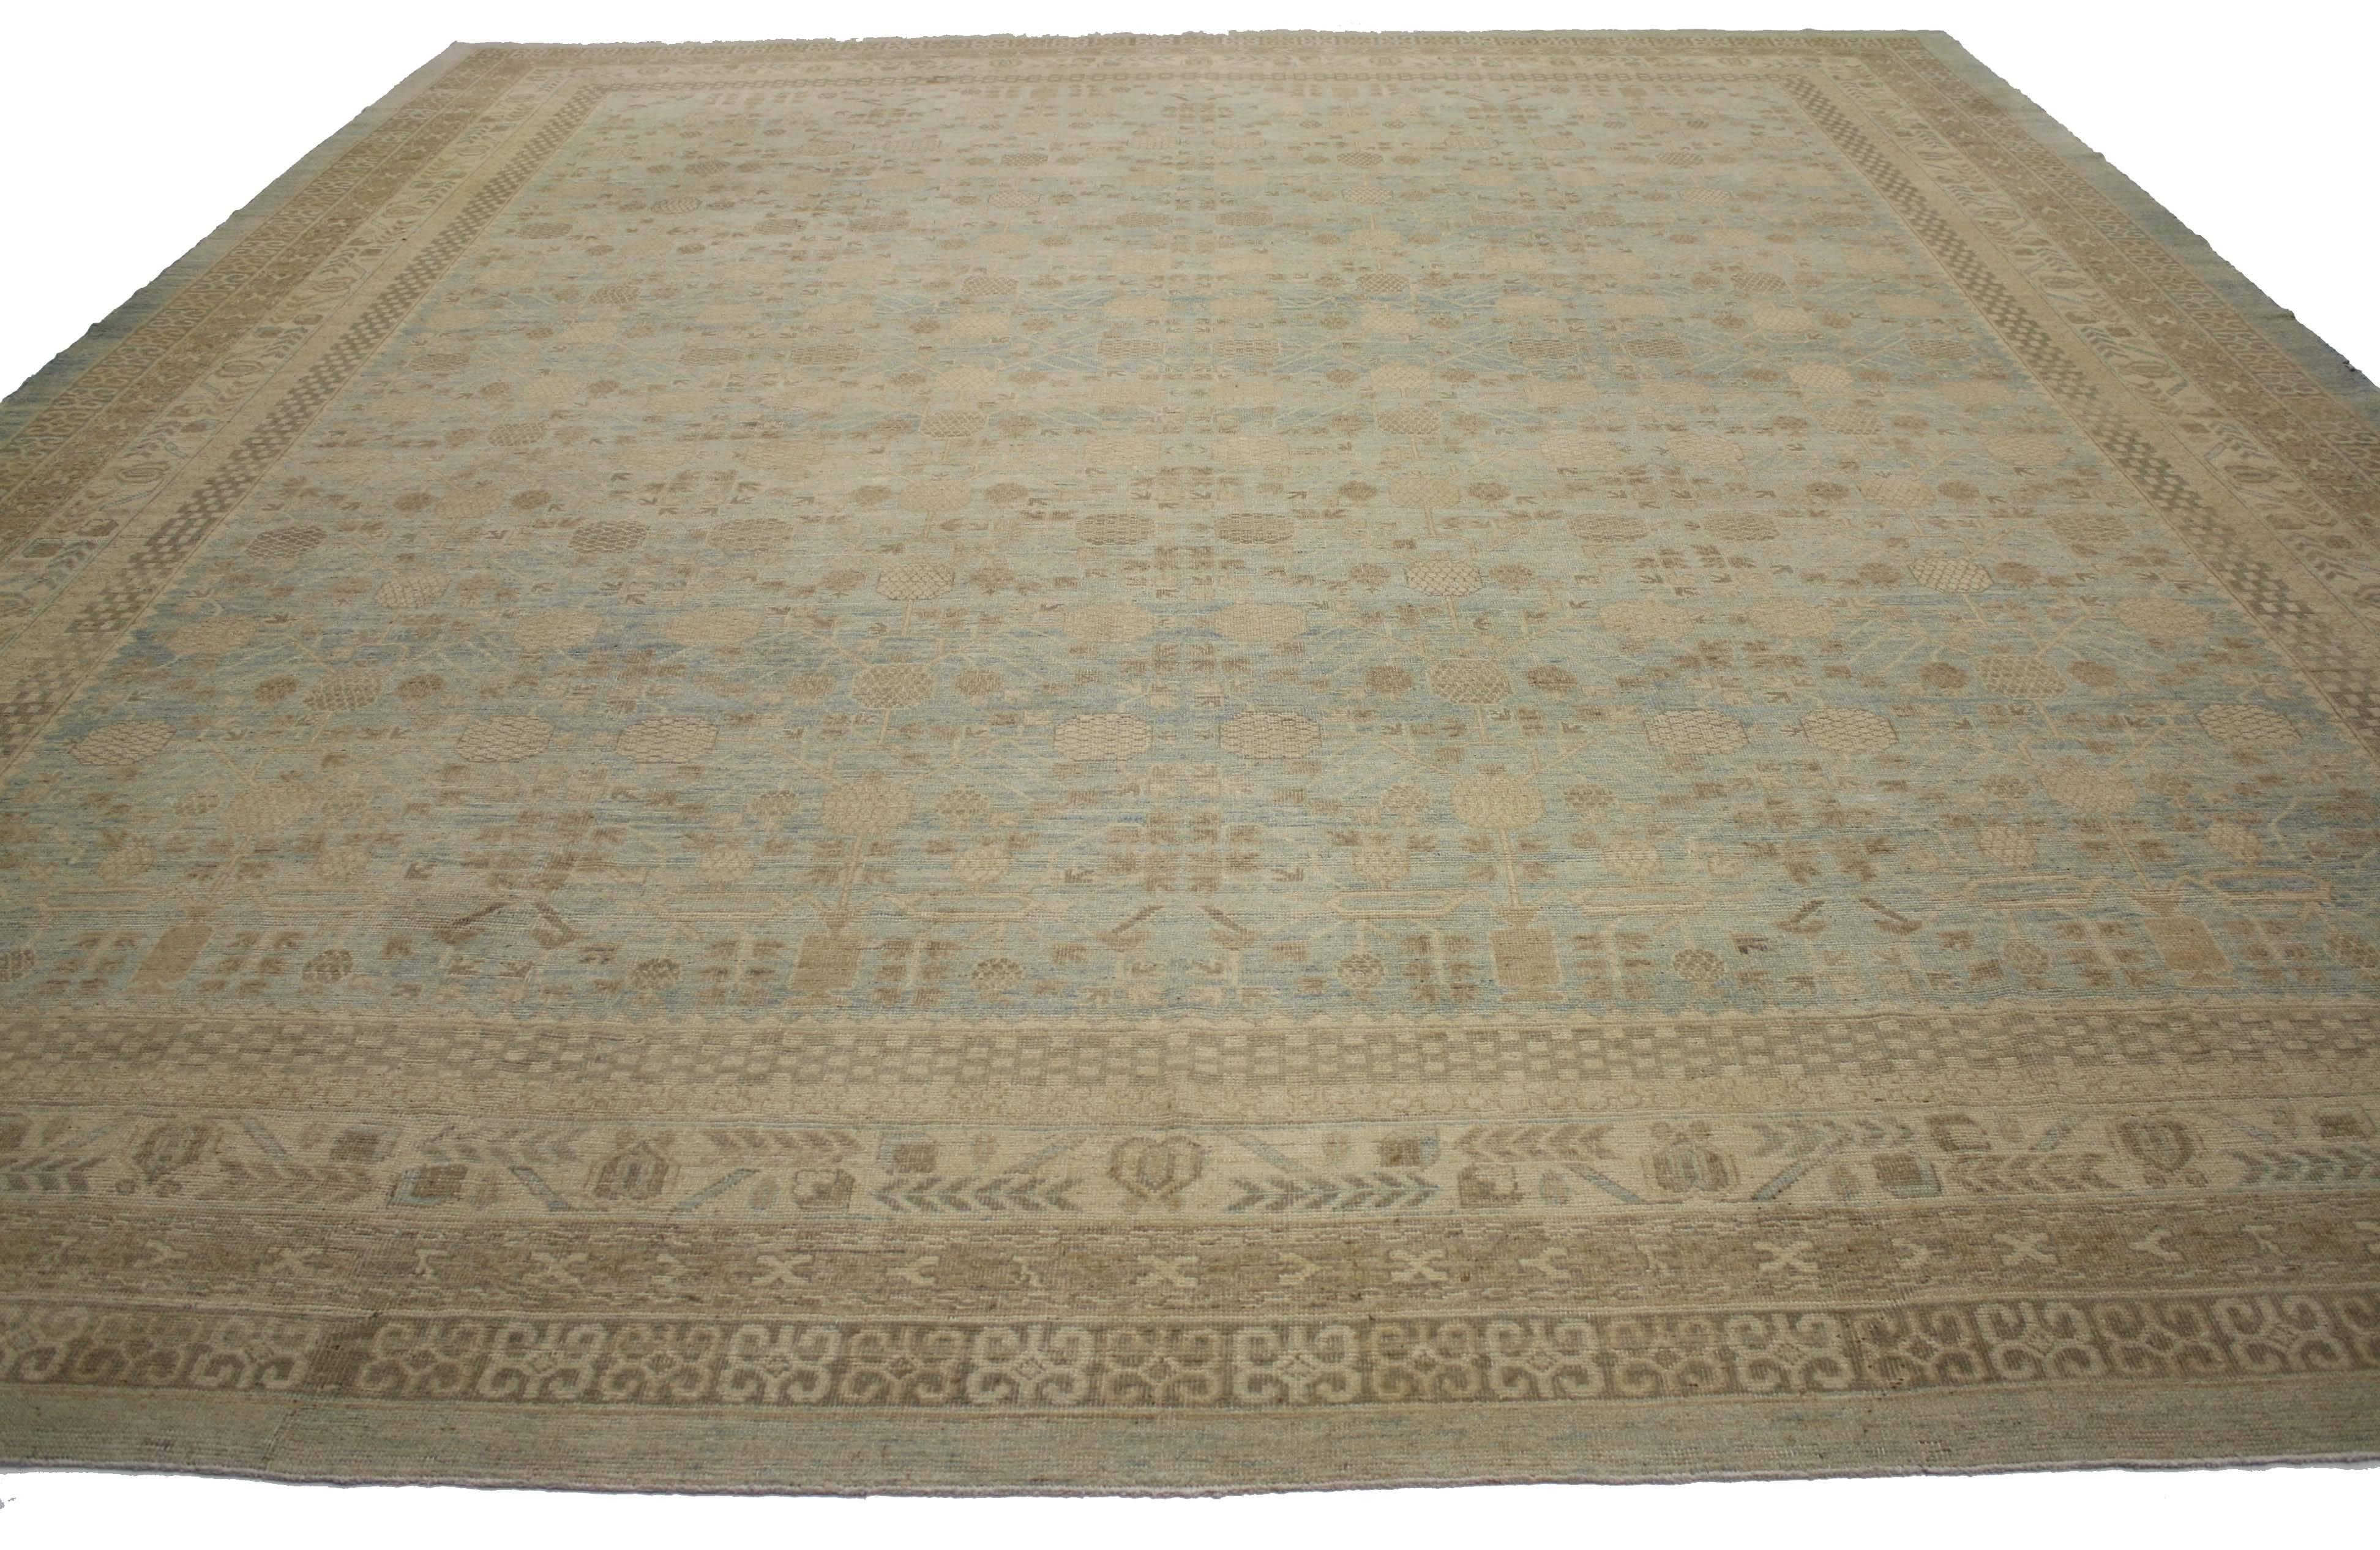 76621 new transitional oversize rug with khotan pomegranate design 12'00 x 14'06. This transitional oversize rug features a Khotan pomegranate design. Providing an element of comfort, artistic statement and functional versatility, this Khotan style